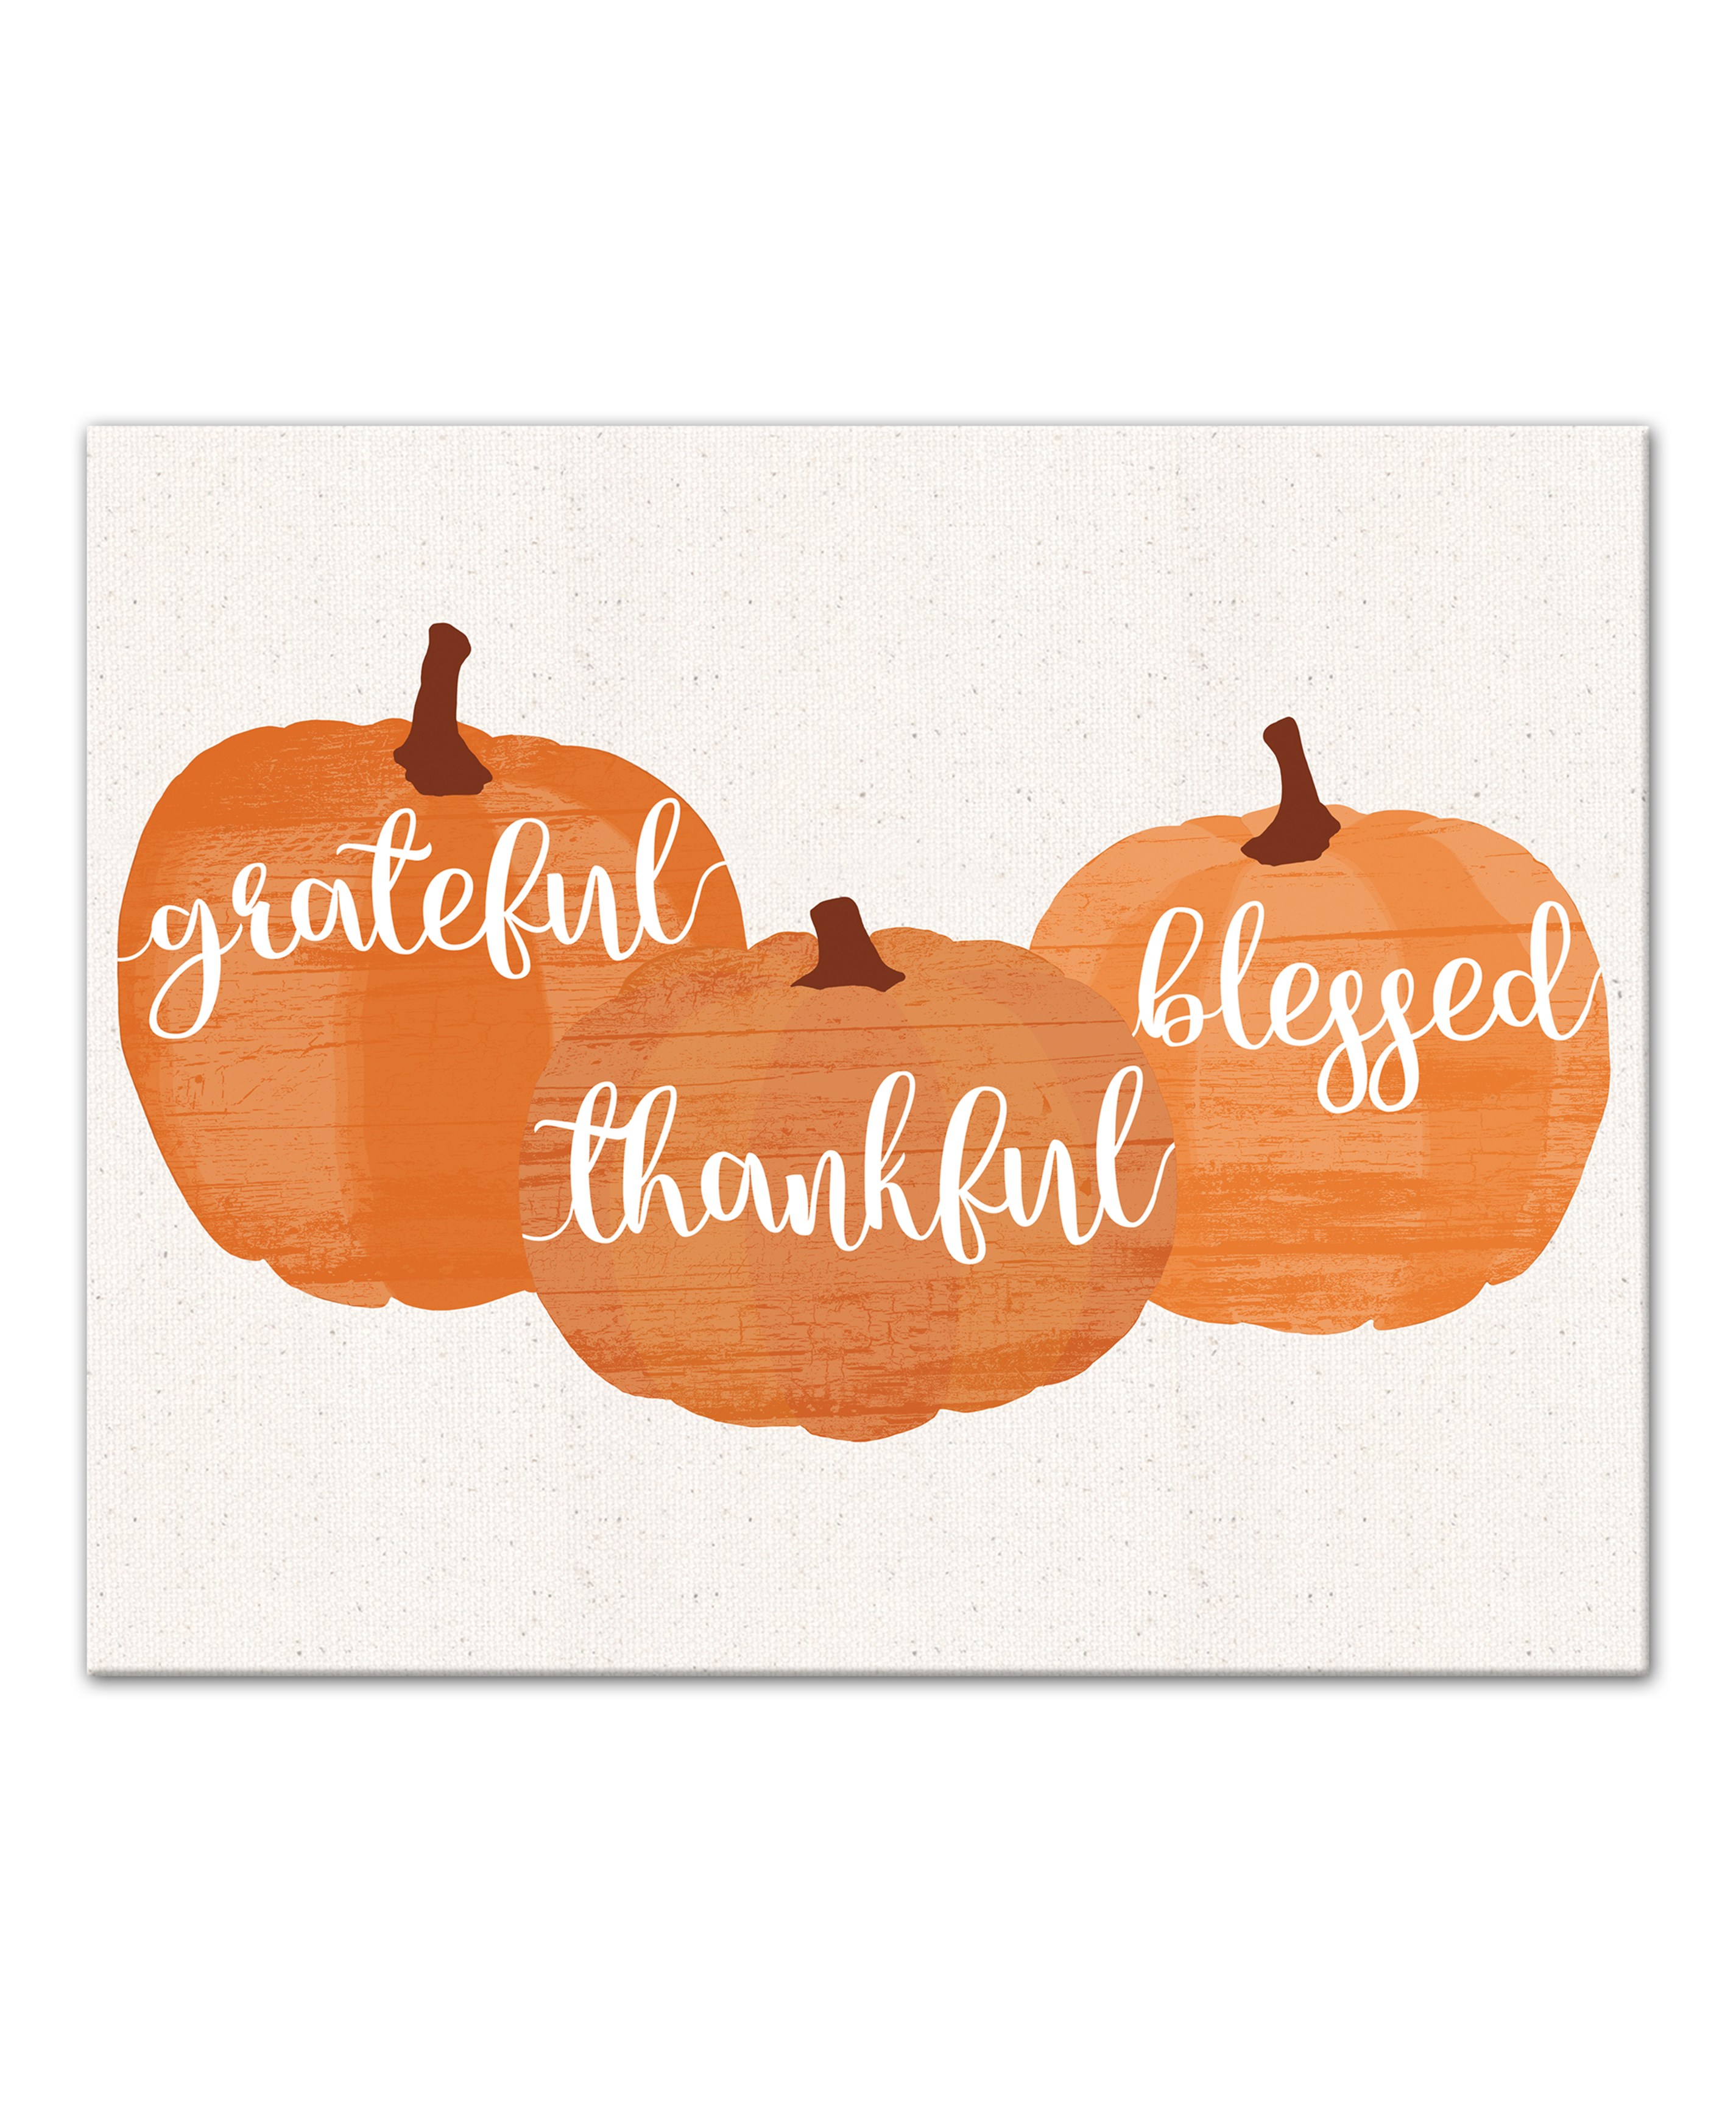 Picture of Grateful Thankful Blessed 16x20 Canvas Wall Art